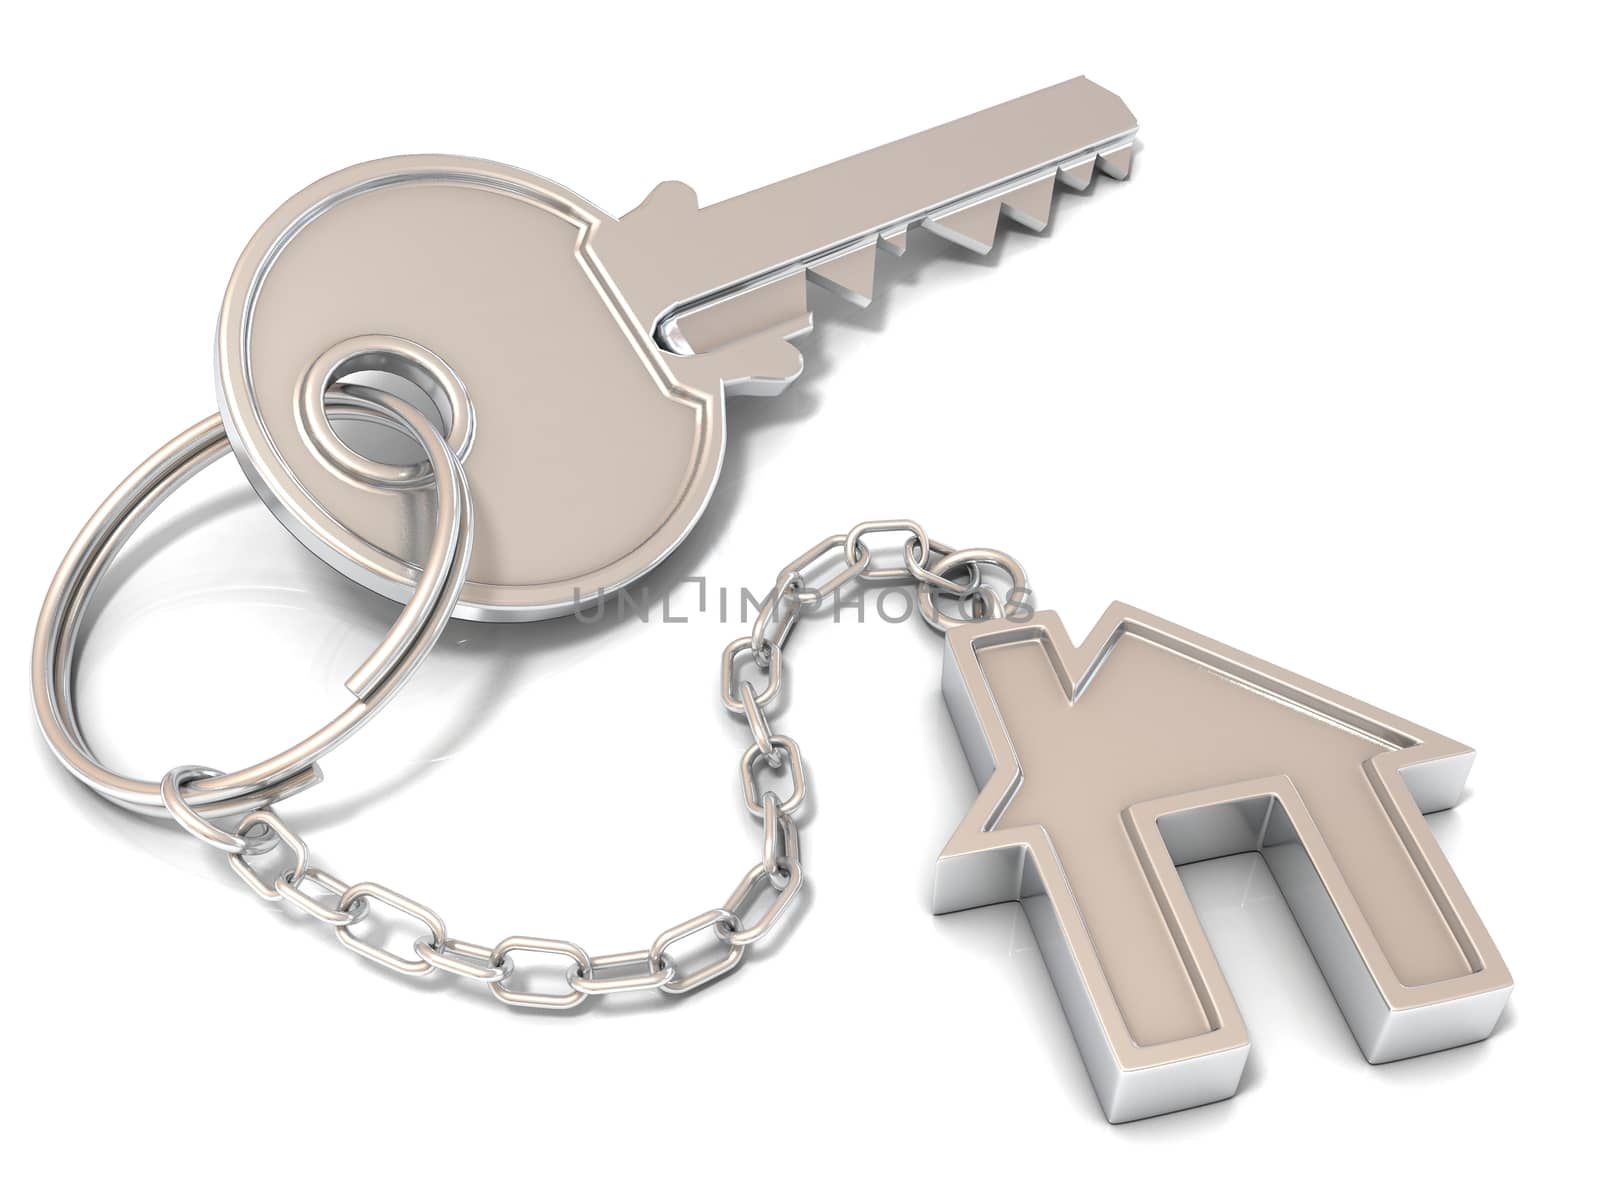 House door key and house key-chain on white background